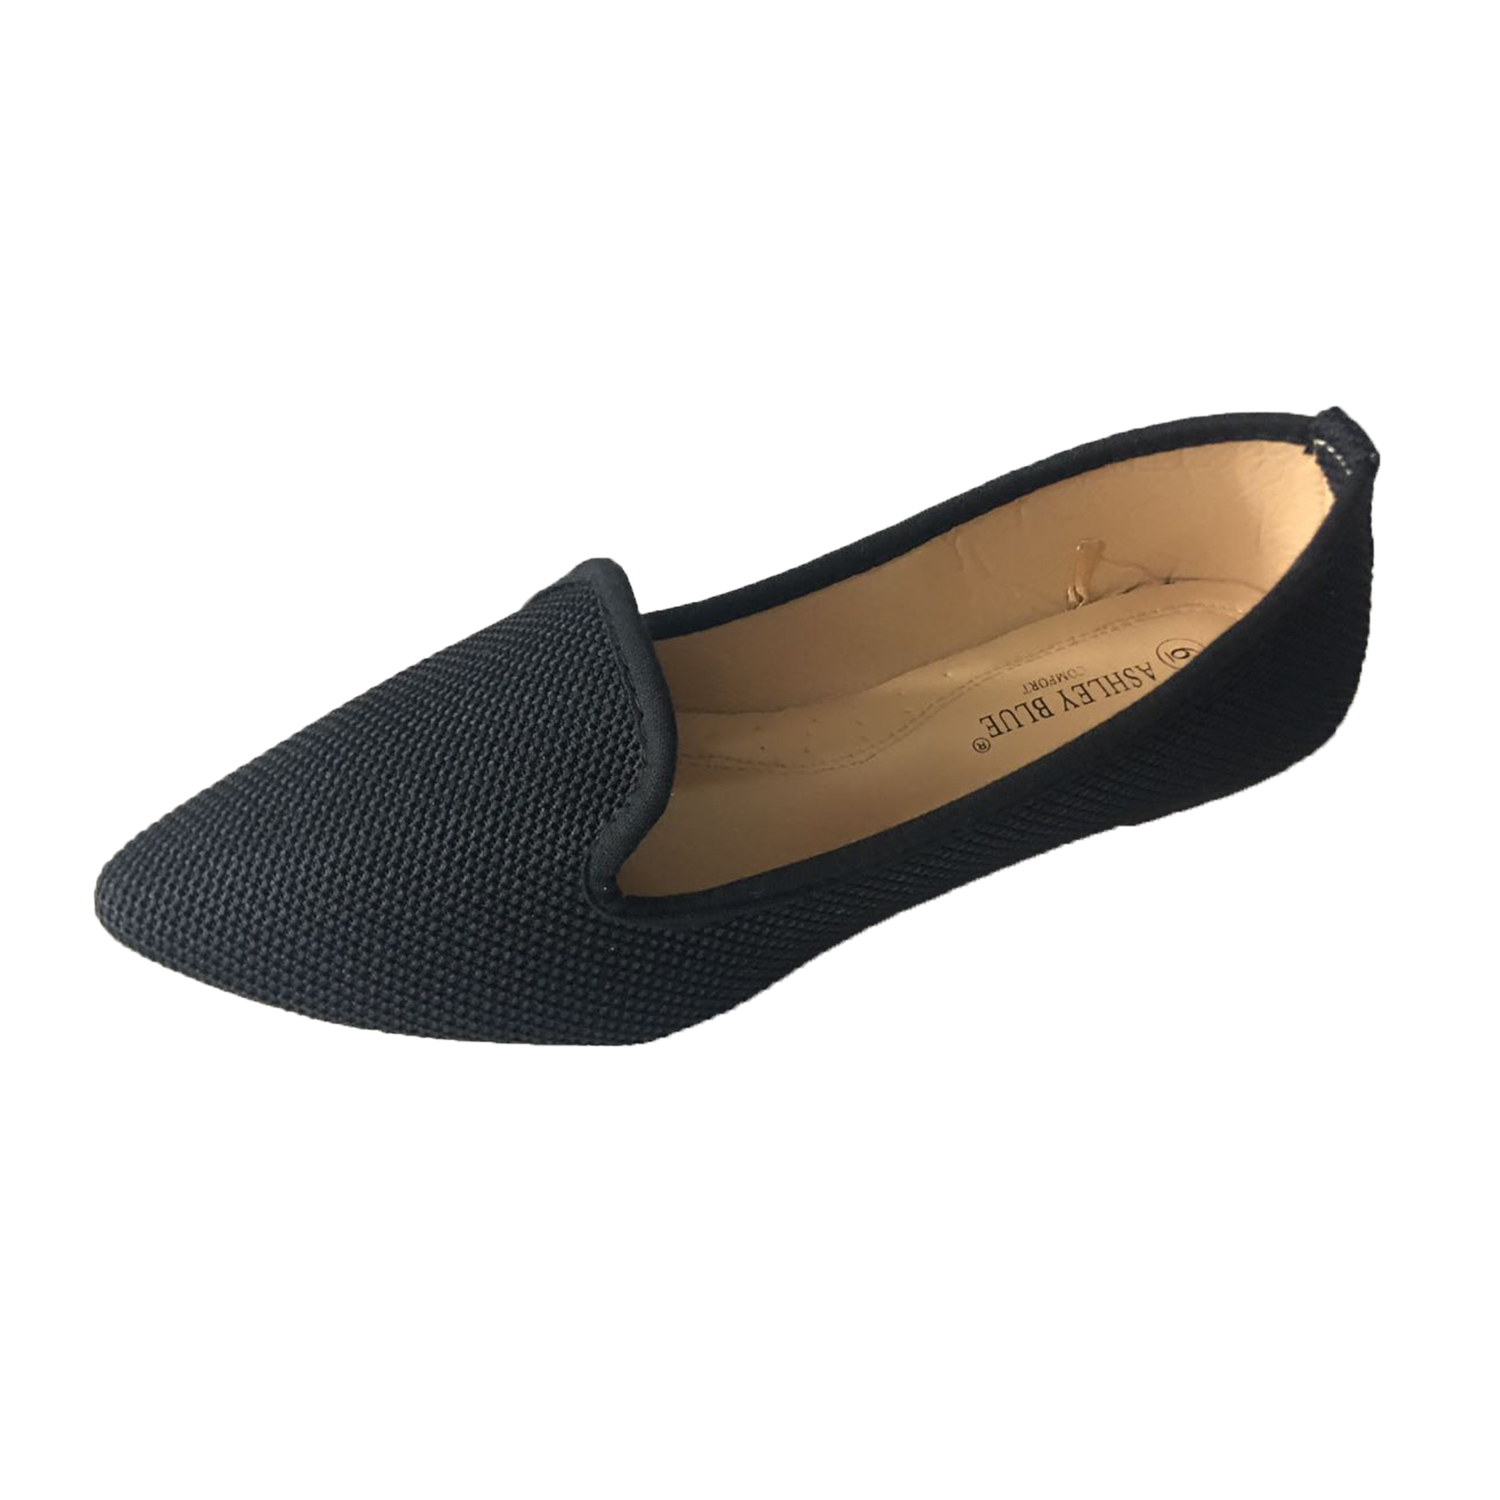 Women's Shoes Slip On Comfort Light Pointed Toe Flats